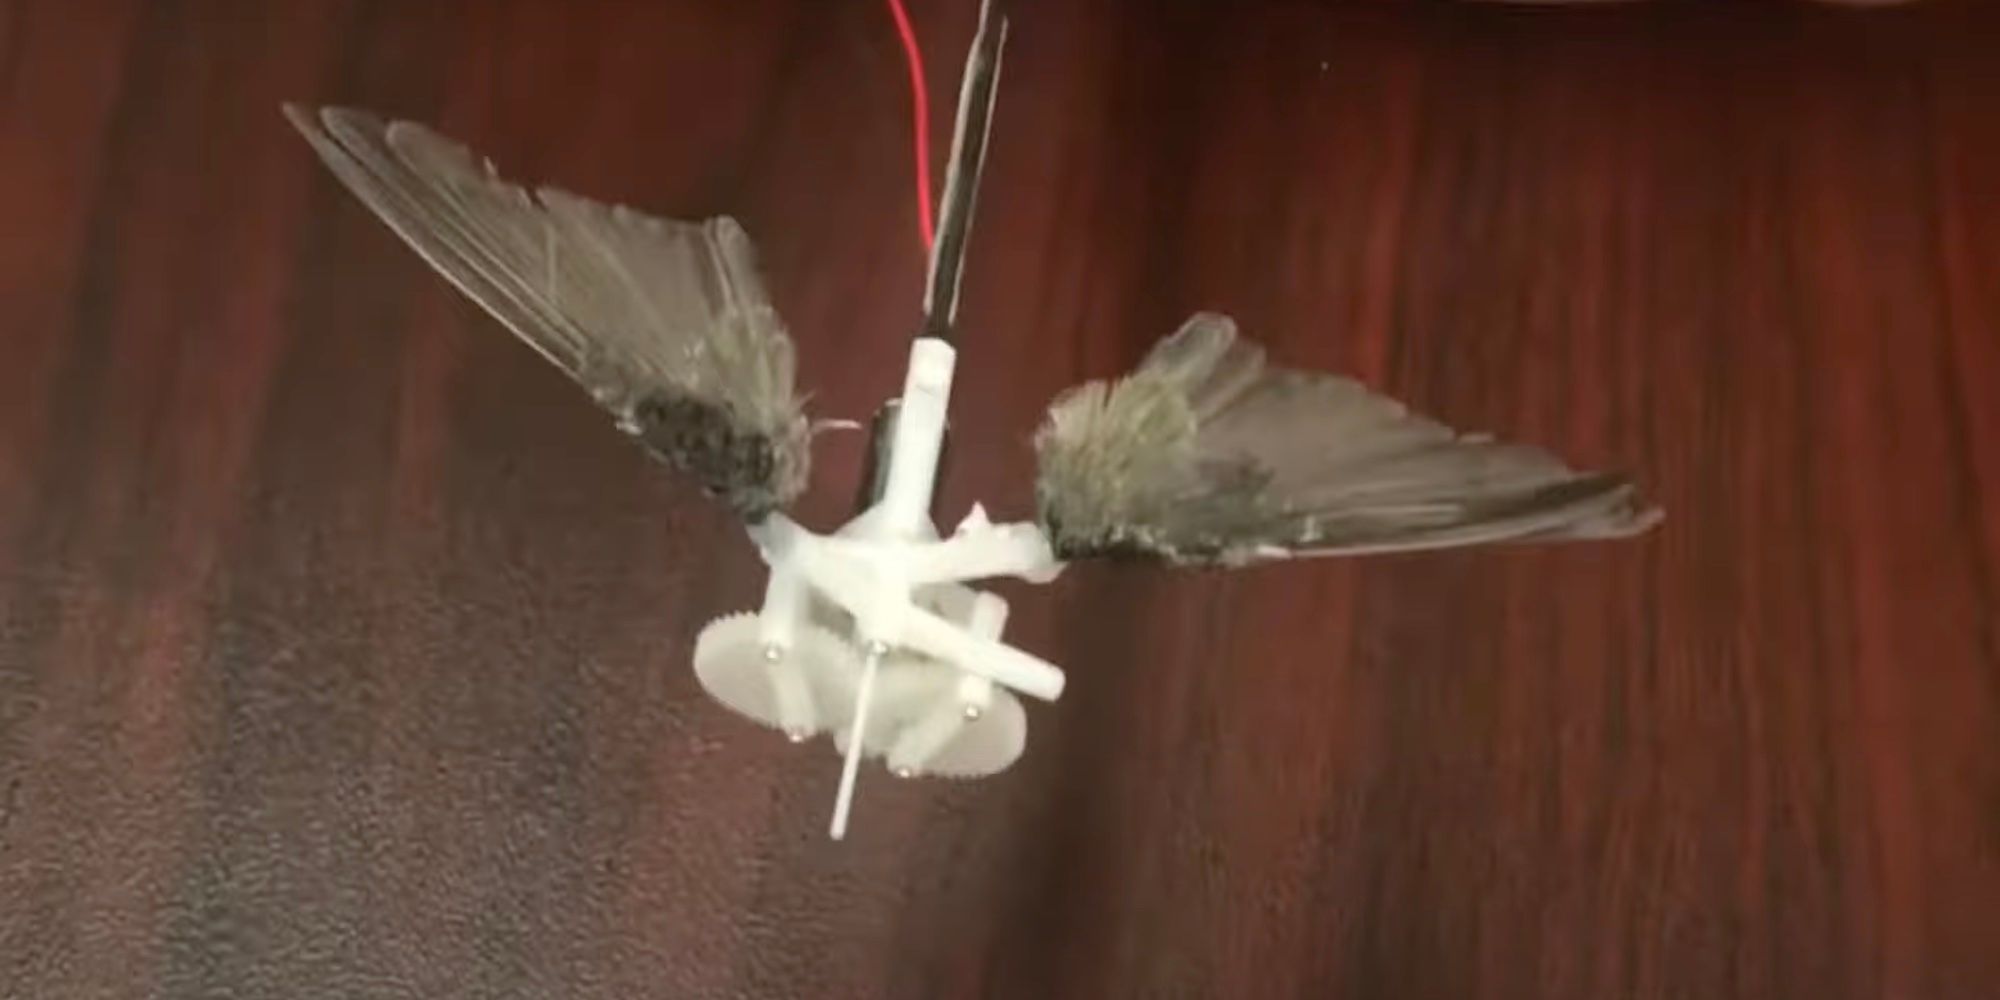 The wing flapping component of a bird drone, featuring just small wings attached to the mechanism